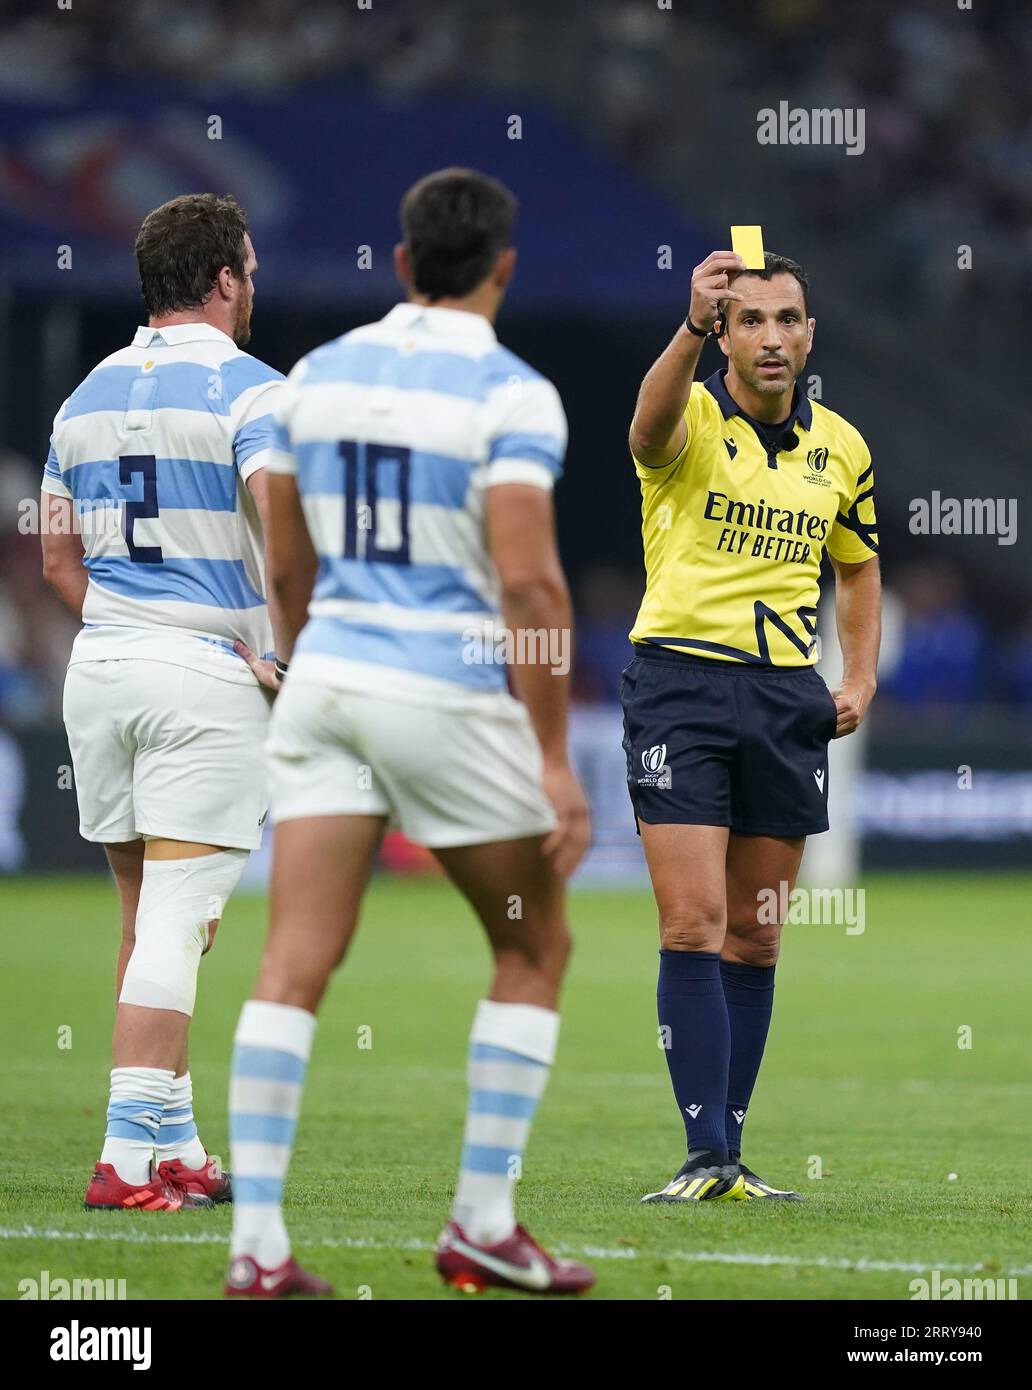 Referee Mathieu Raynal shows a yellow card to Argentina's Santiago Carreras during the 2023 Rugby World Cup Pool D match at the Stade de Marseille, France. Picture date: Saturday September 9, 2023. Stock Photo